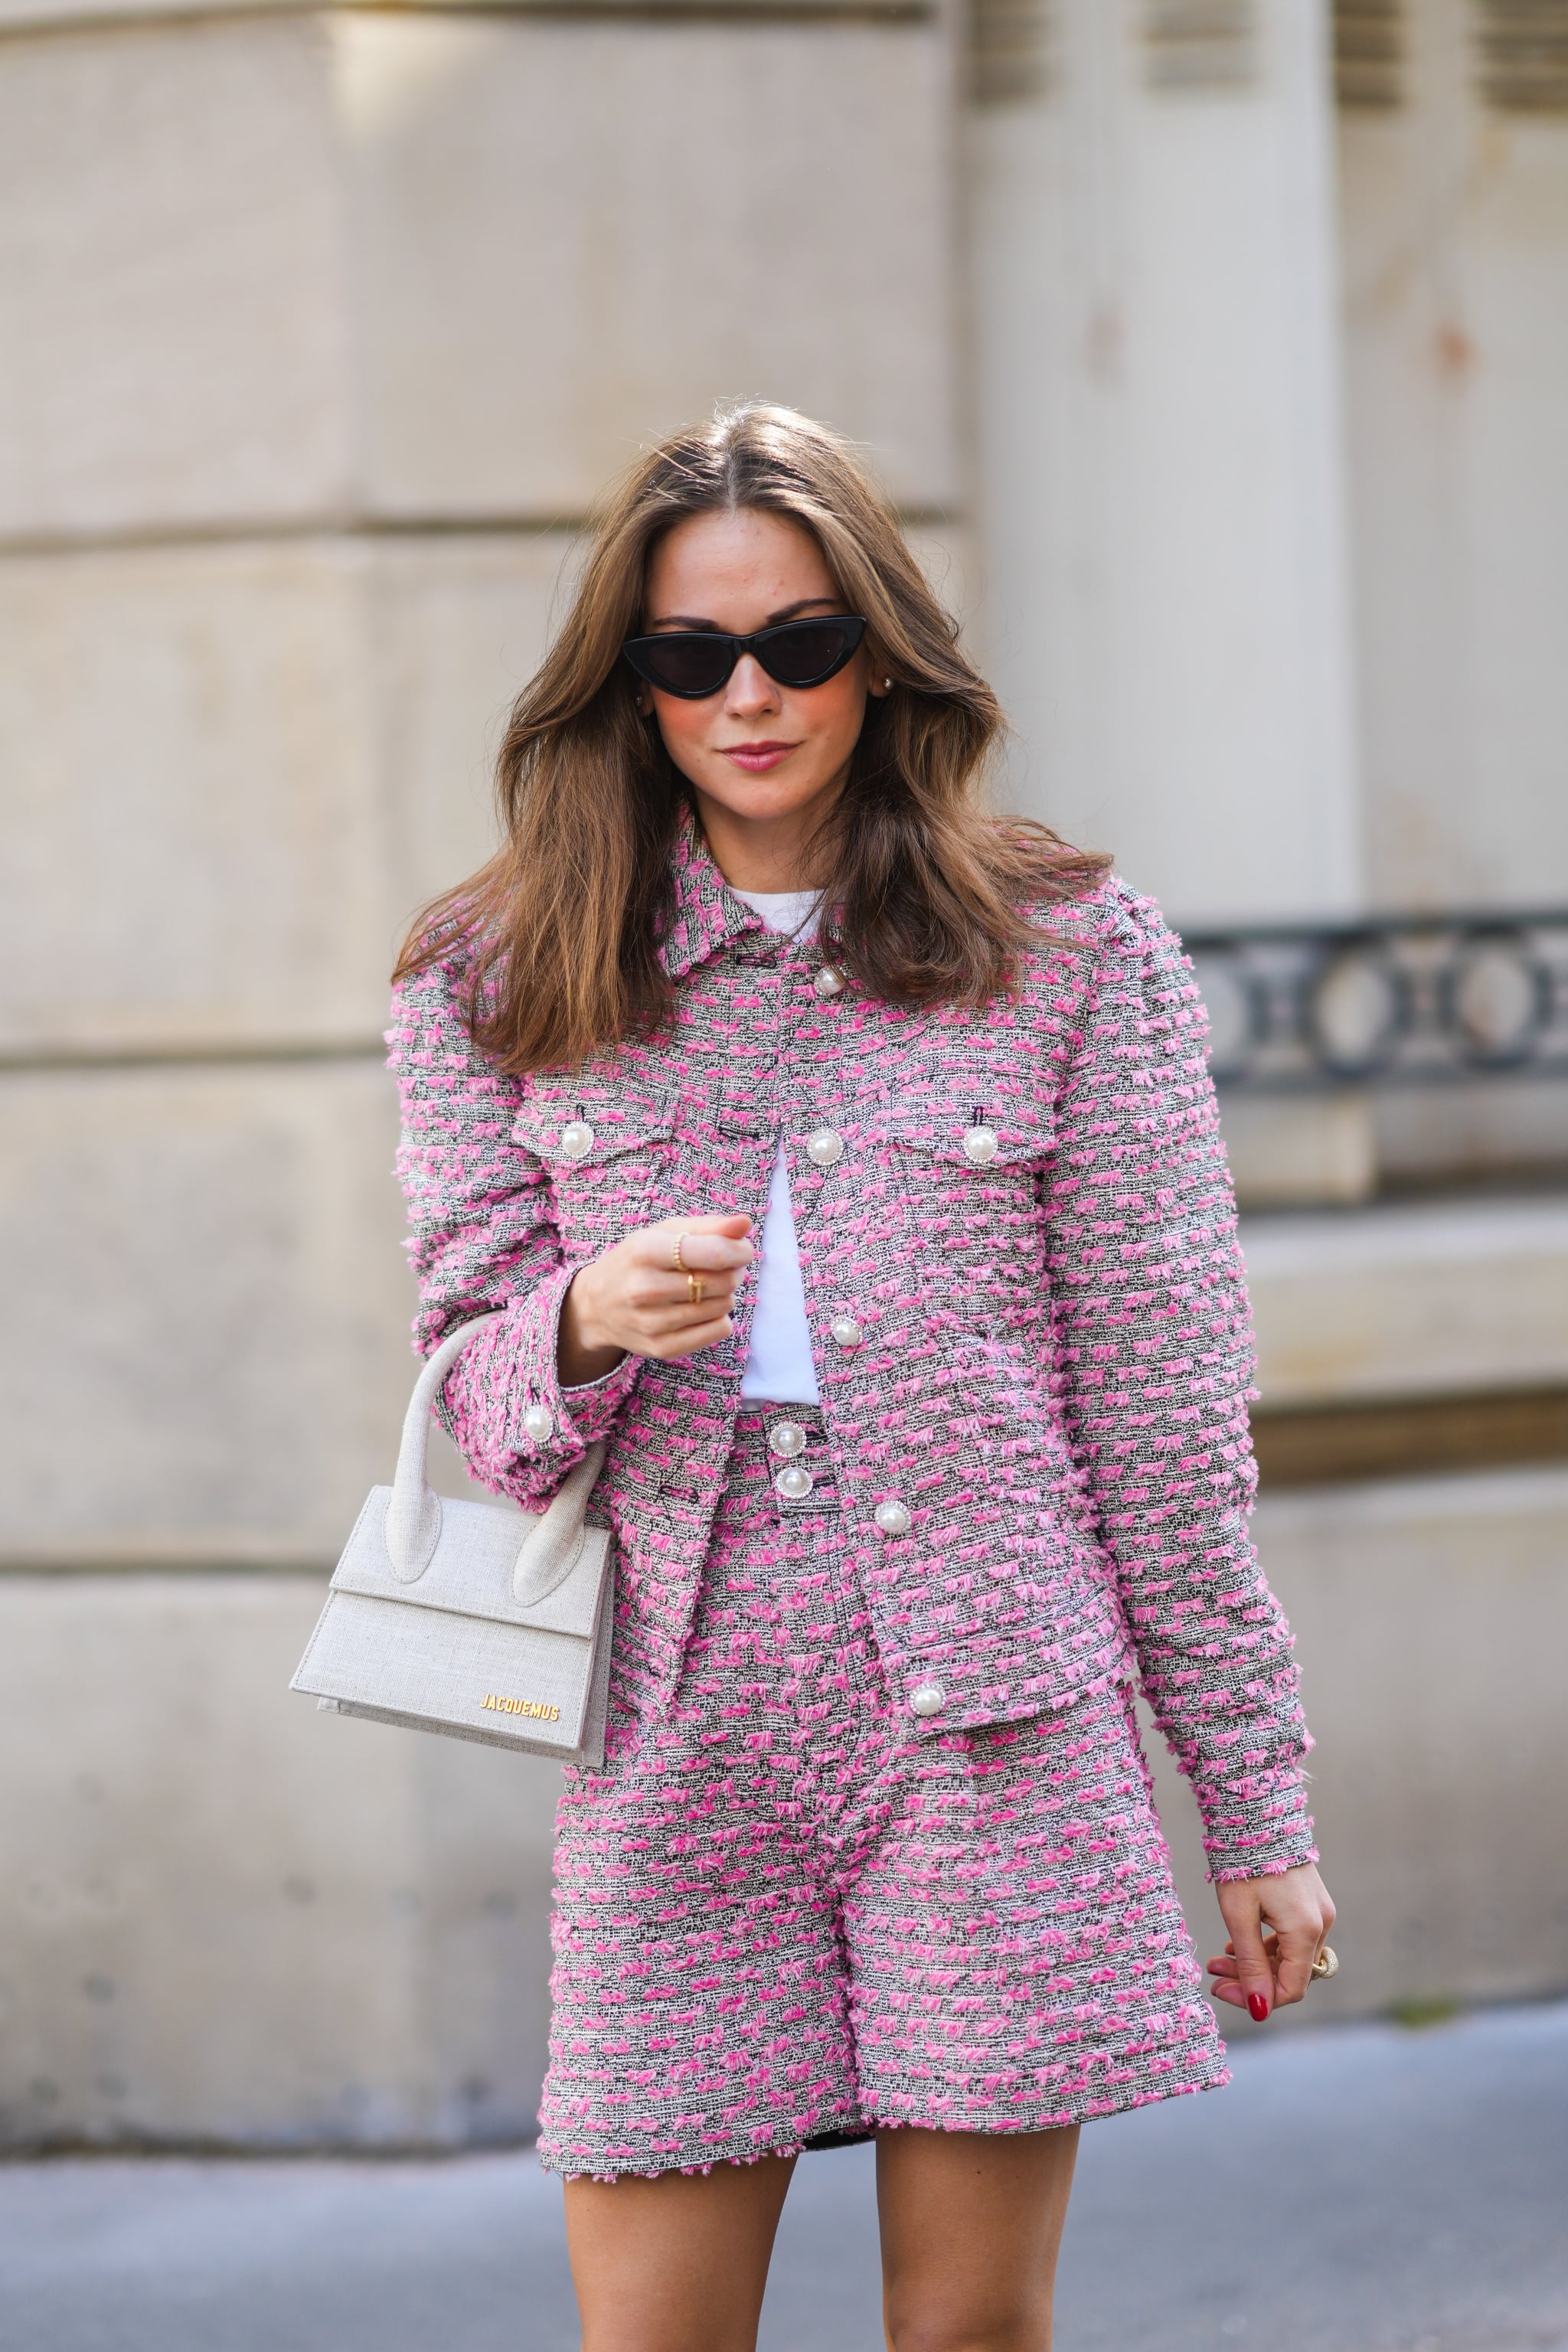 PARIS, FRANCE - MARCH 30: Therese Hellström @tesshell wears sunglasses, a white t-shirt, a gray purple / pink tweed knit jacket with pearls, purple / pink tweed knit shorts, a white Jacquemus bag, on March 30, 2021 in Paris, France. (Photo by Edward Berthelot/Getty Images)